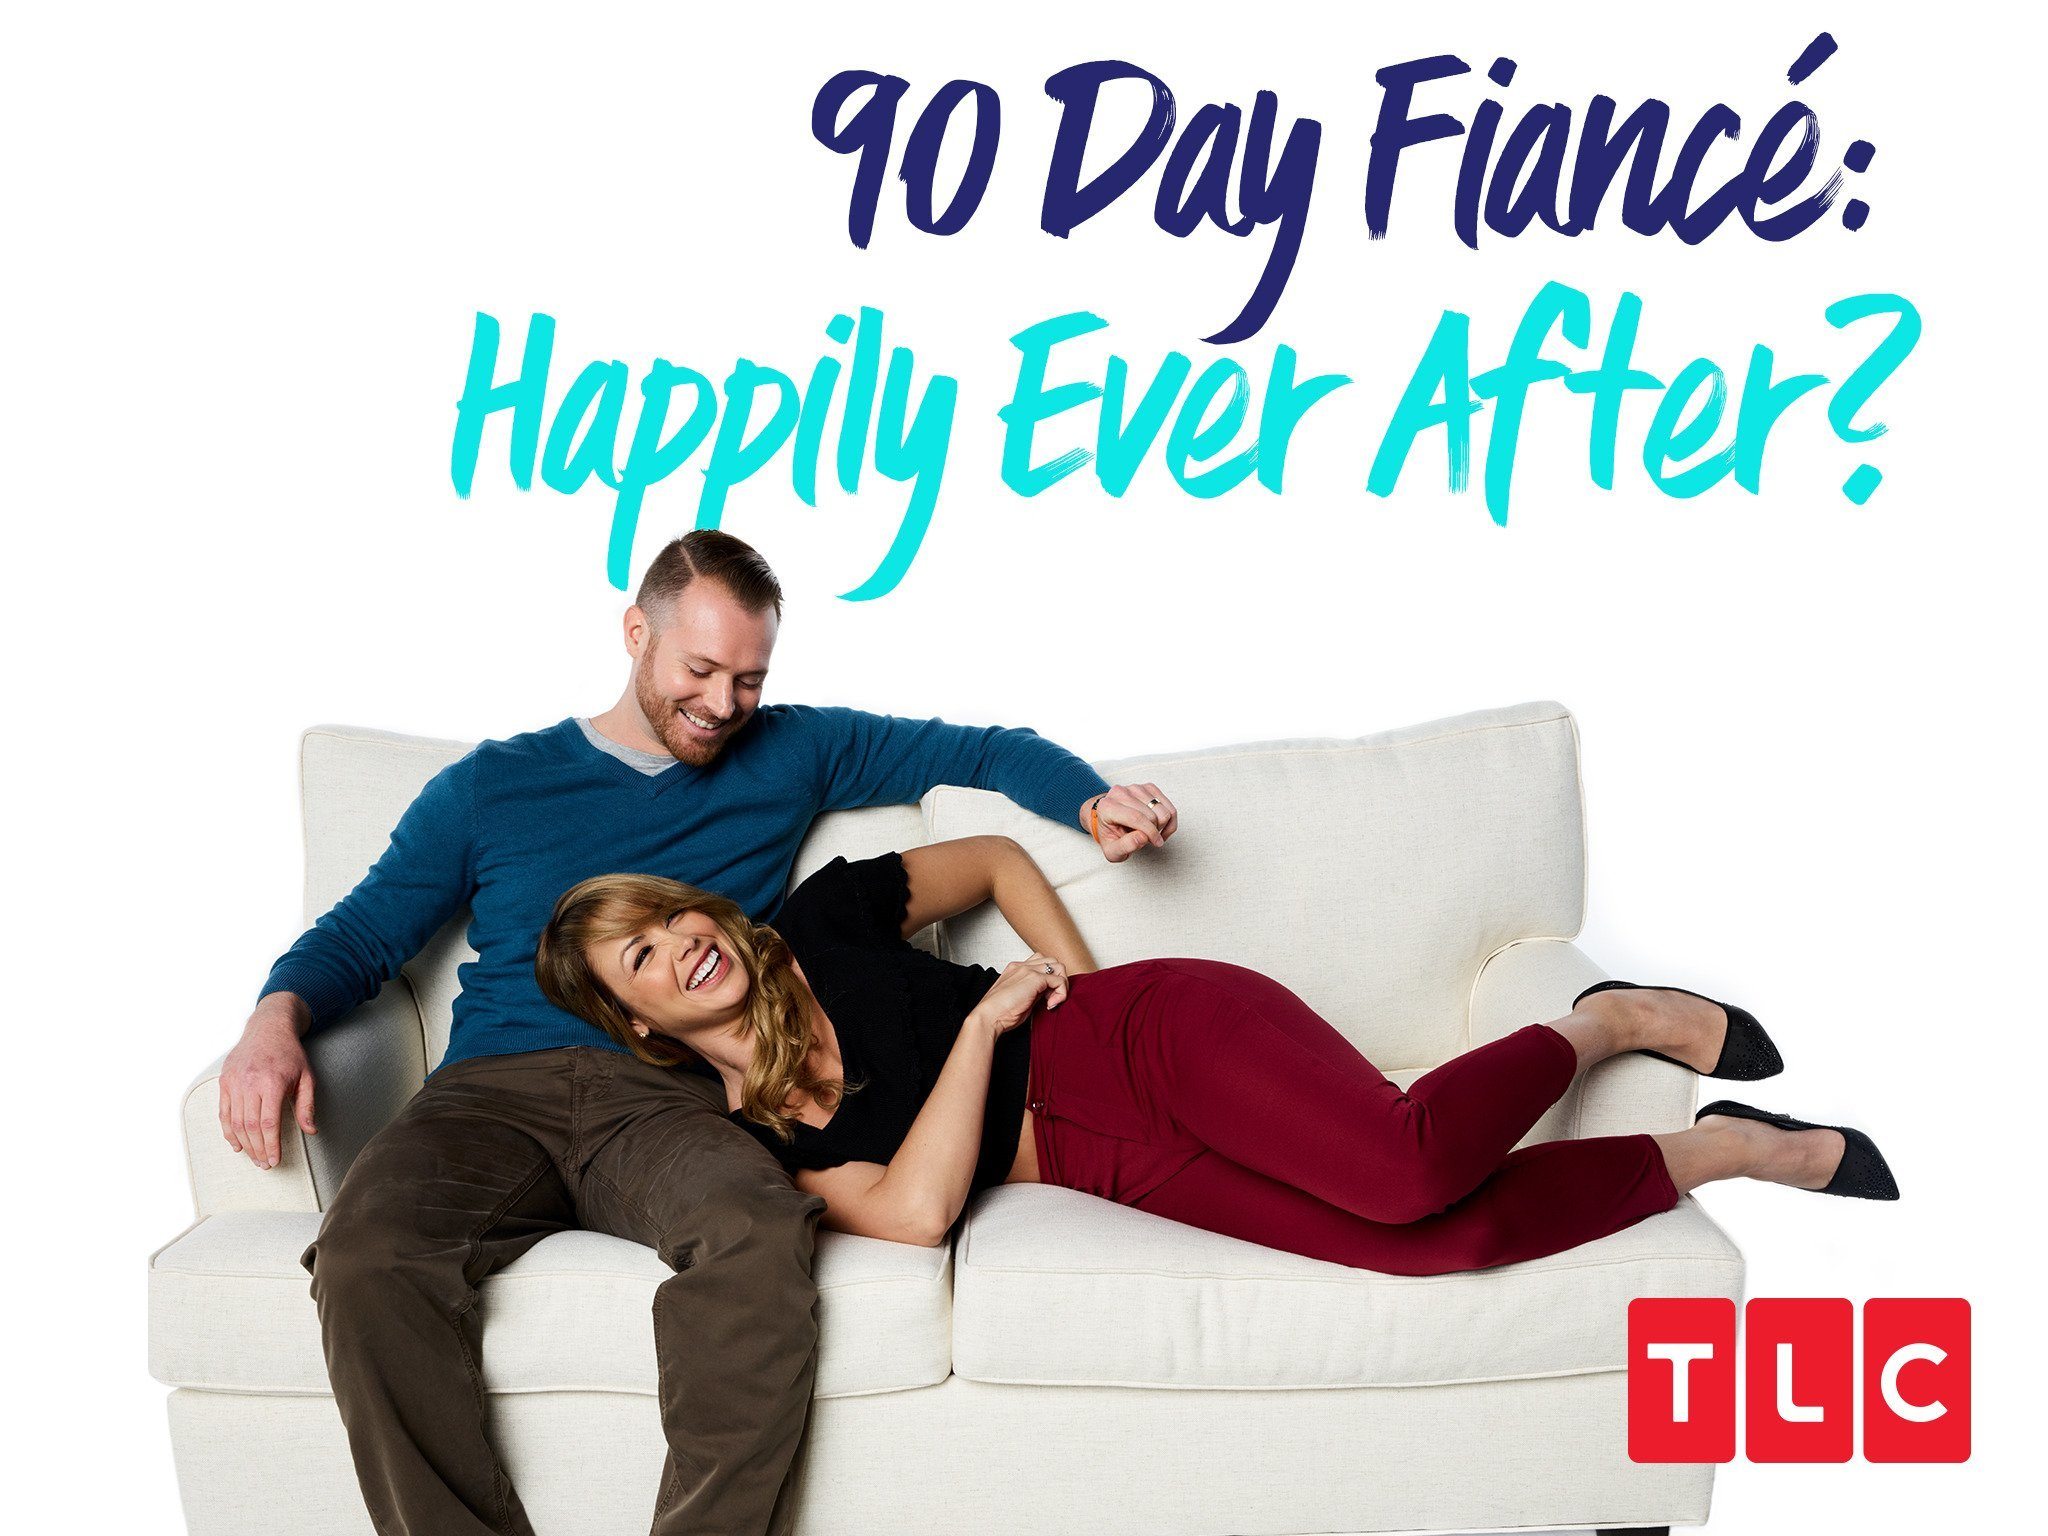 Episode 2 of 90 Day Fiance Happily Ever After